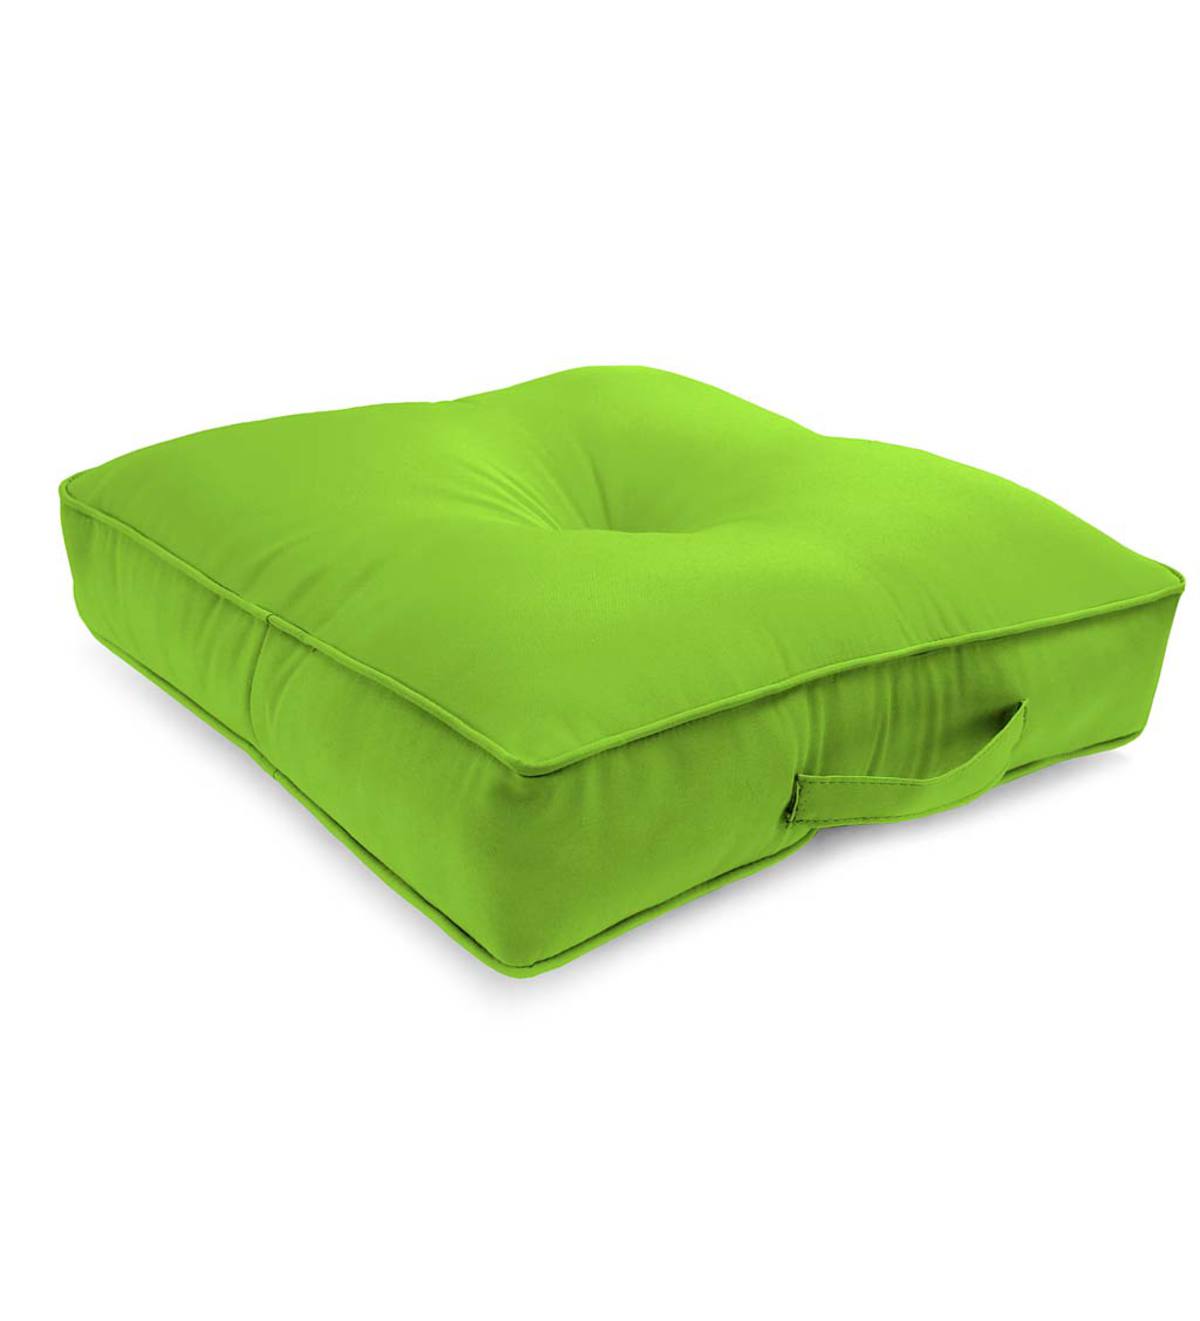 Polyester Classic Tufted Floor Cushion With Handle